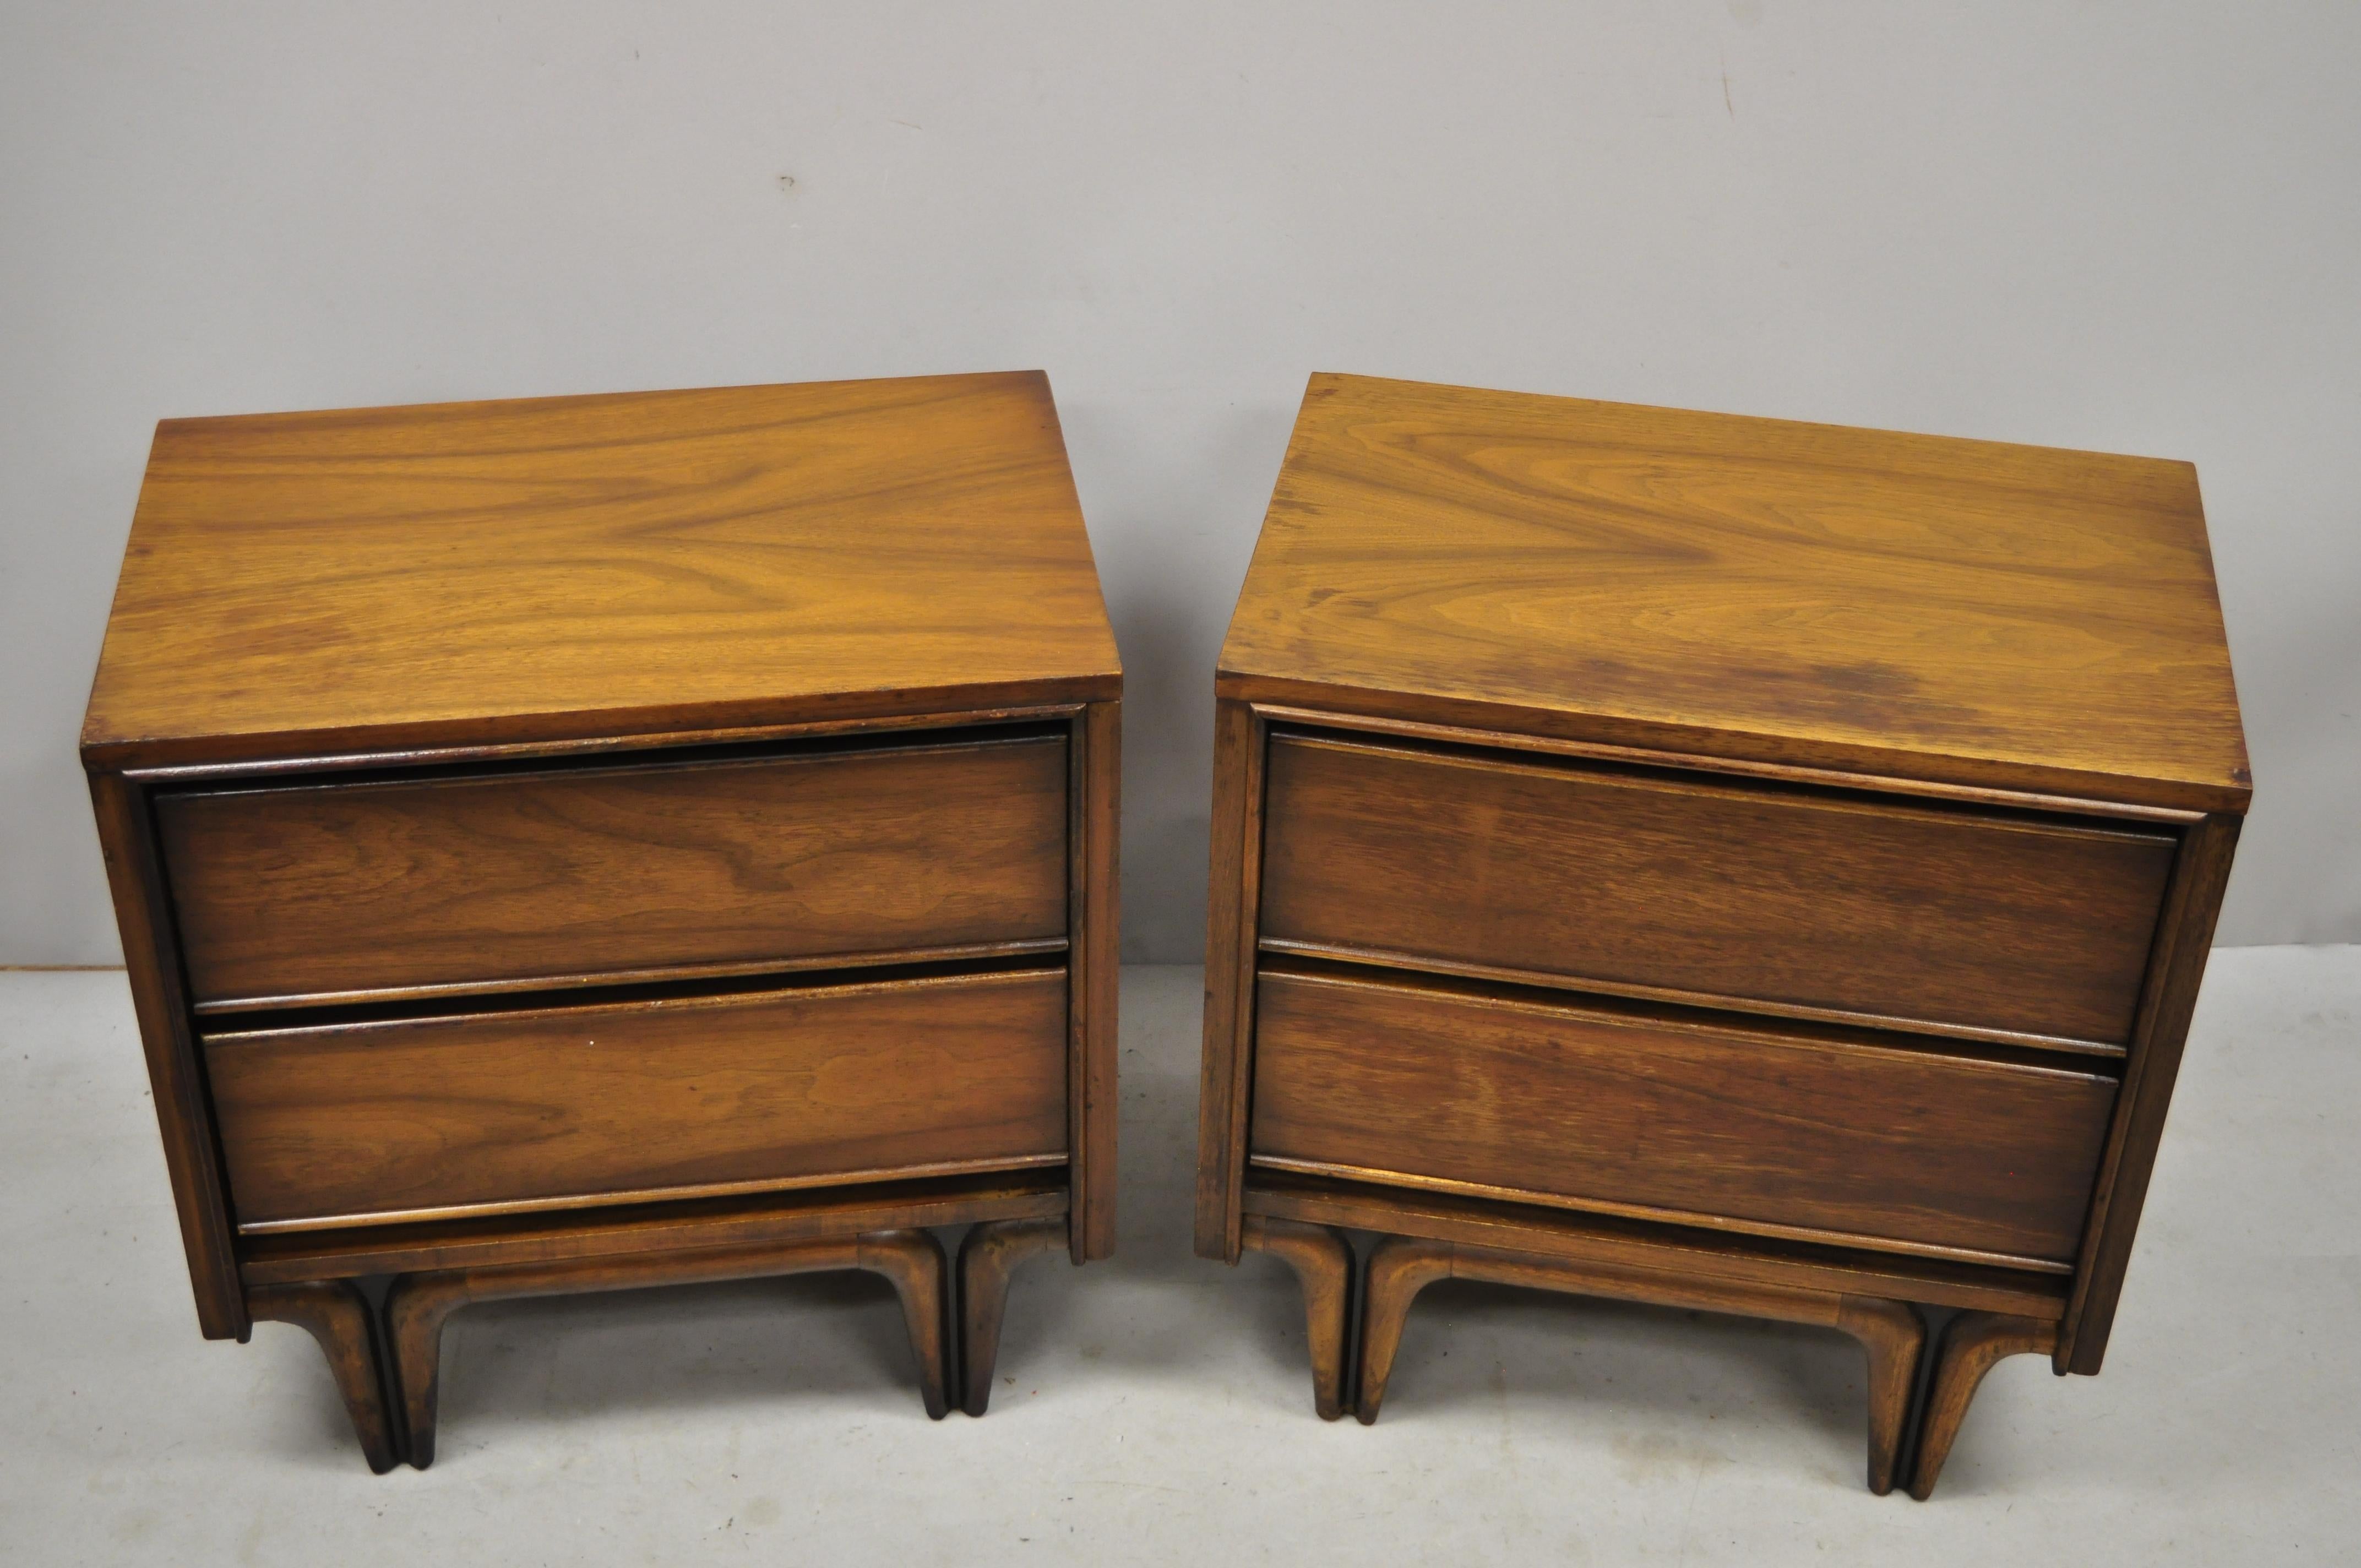 Pair of Mid-Century Modern sculpted walnut V-leg nightstands bedside tables. Item features sculpted and tapered 